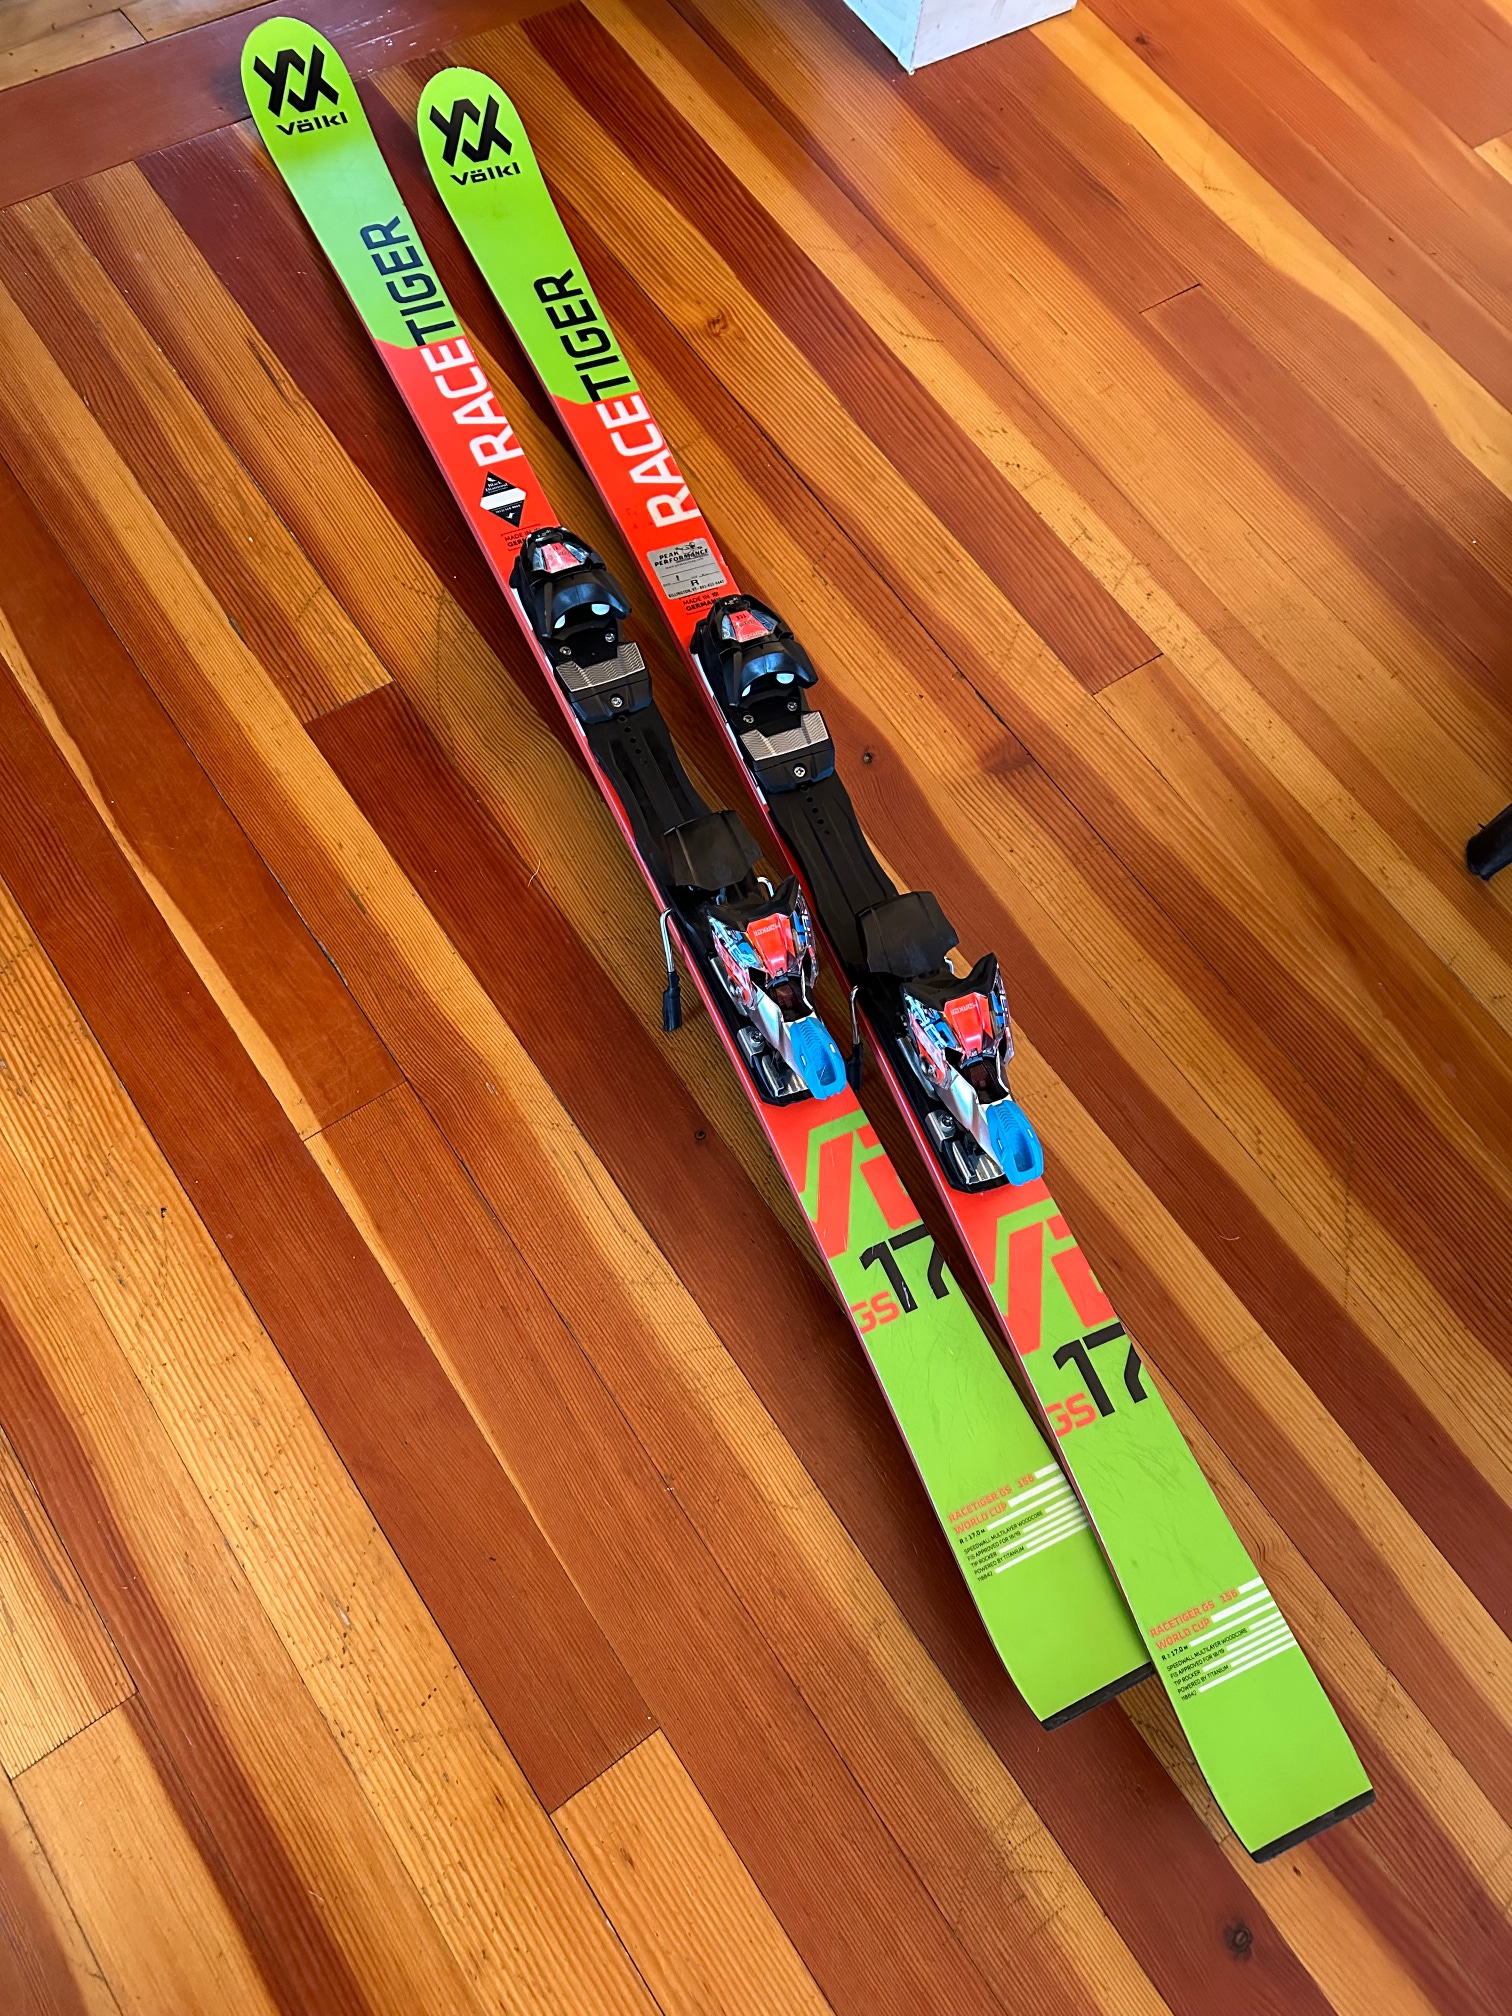 Volkl GS Race Tiger 156 cm Skis With Bindings